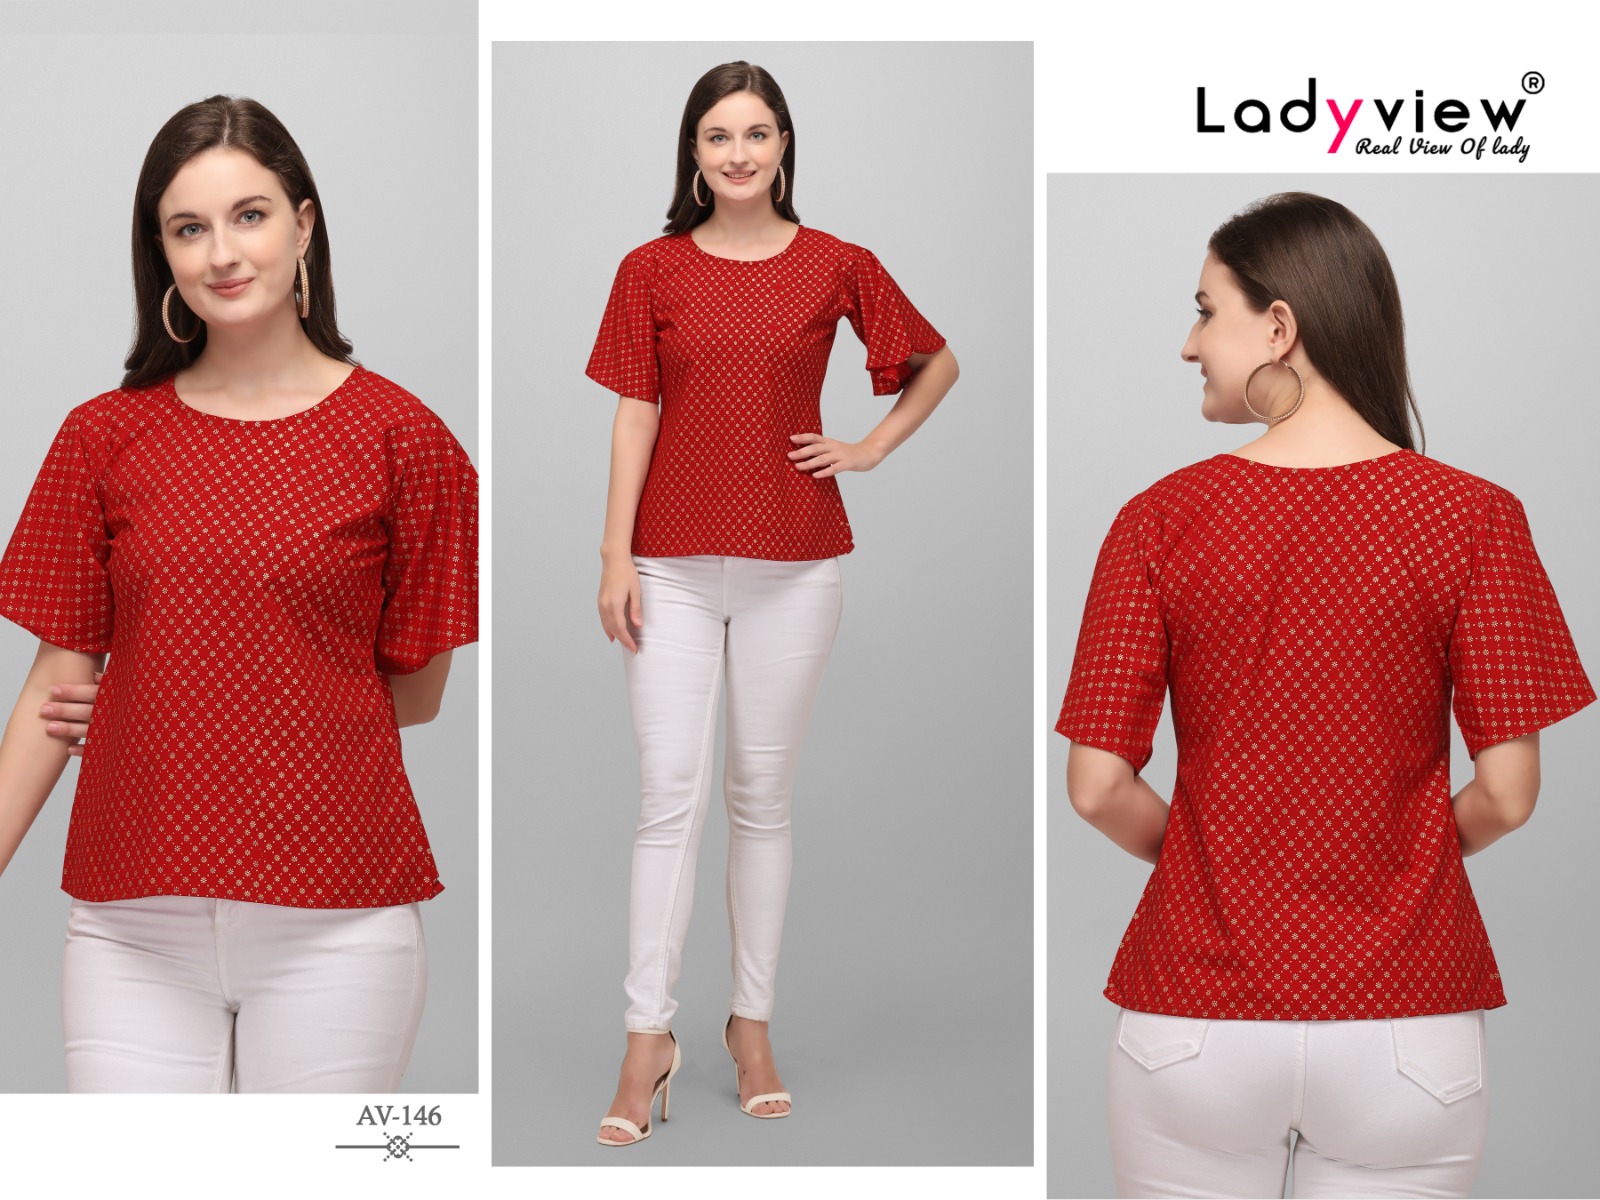 ladyview goldy Heavy Crepe with Foil Print innovative look tops catalog